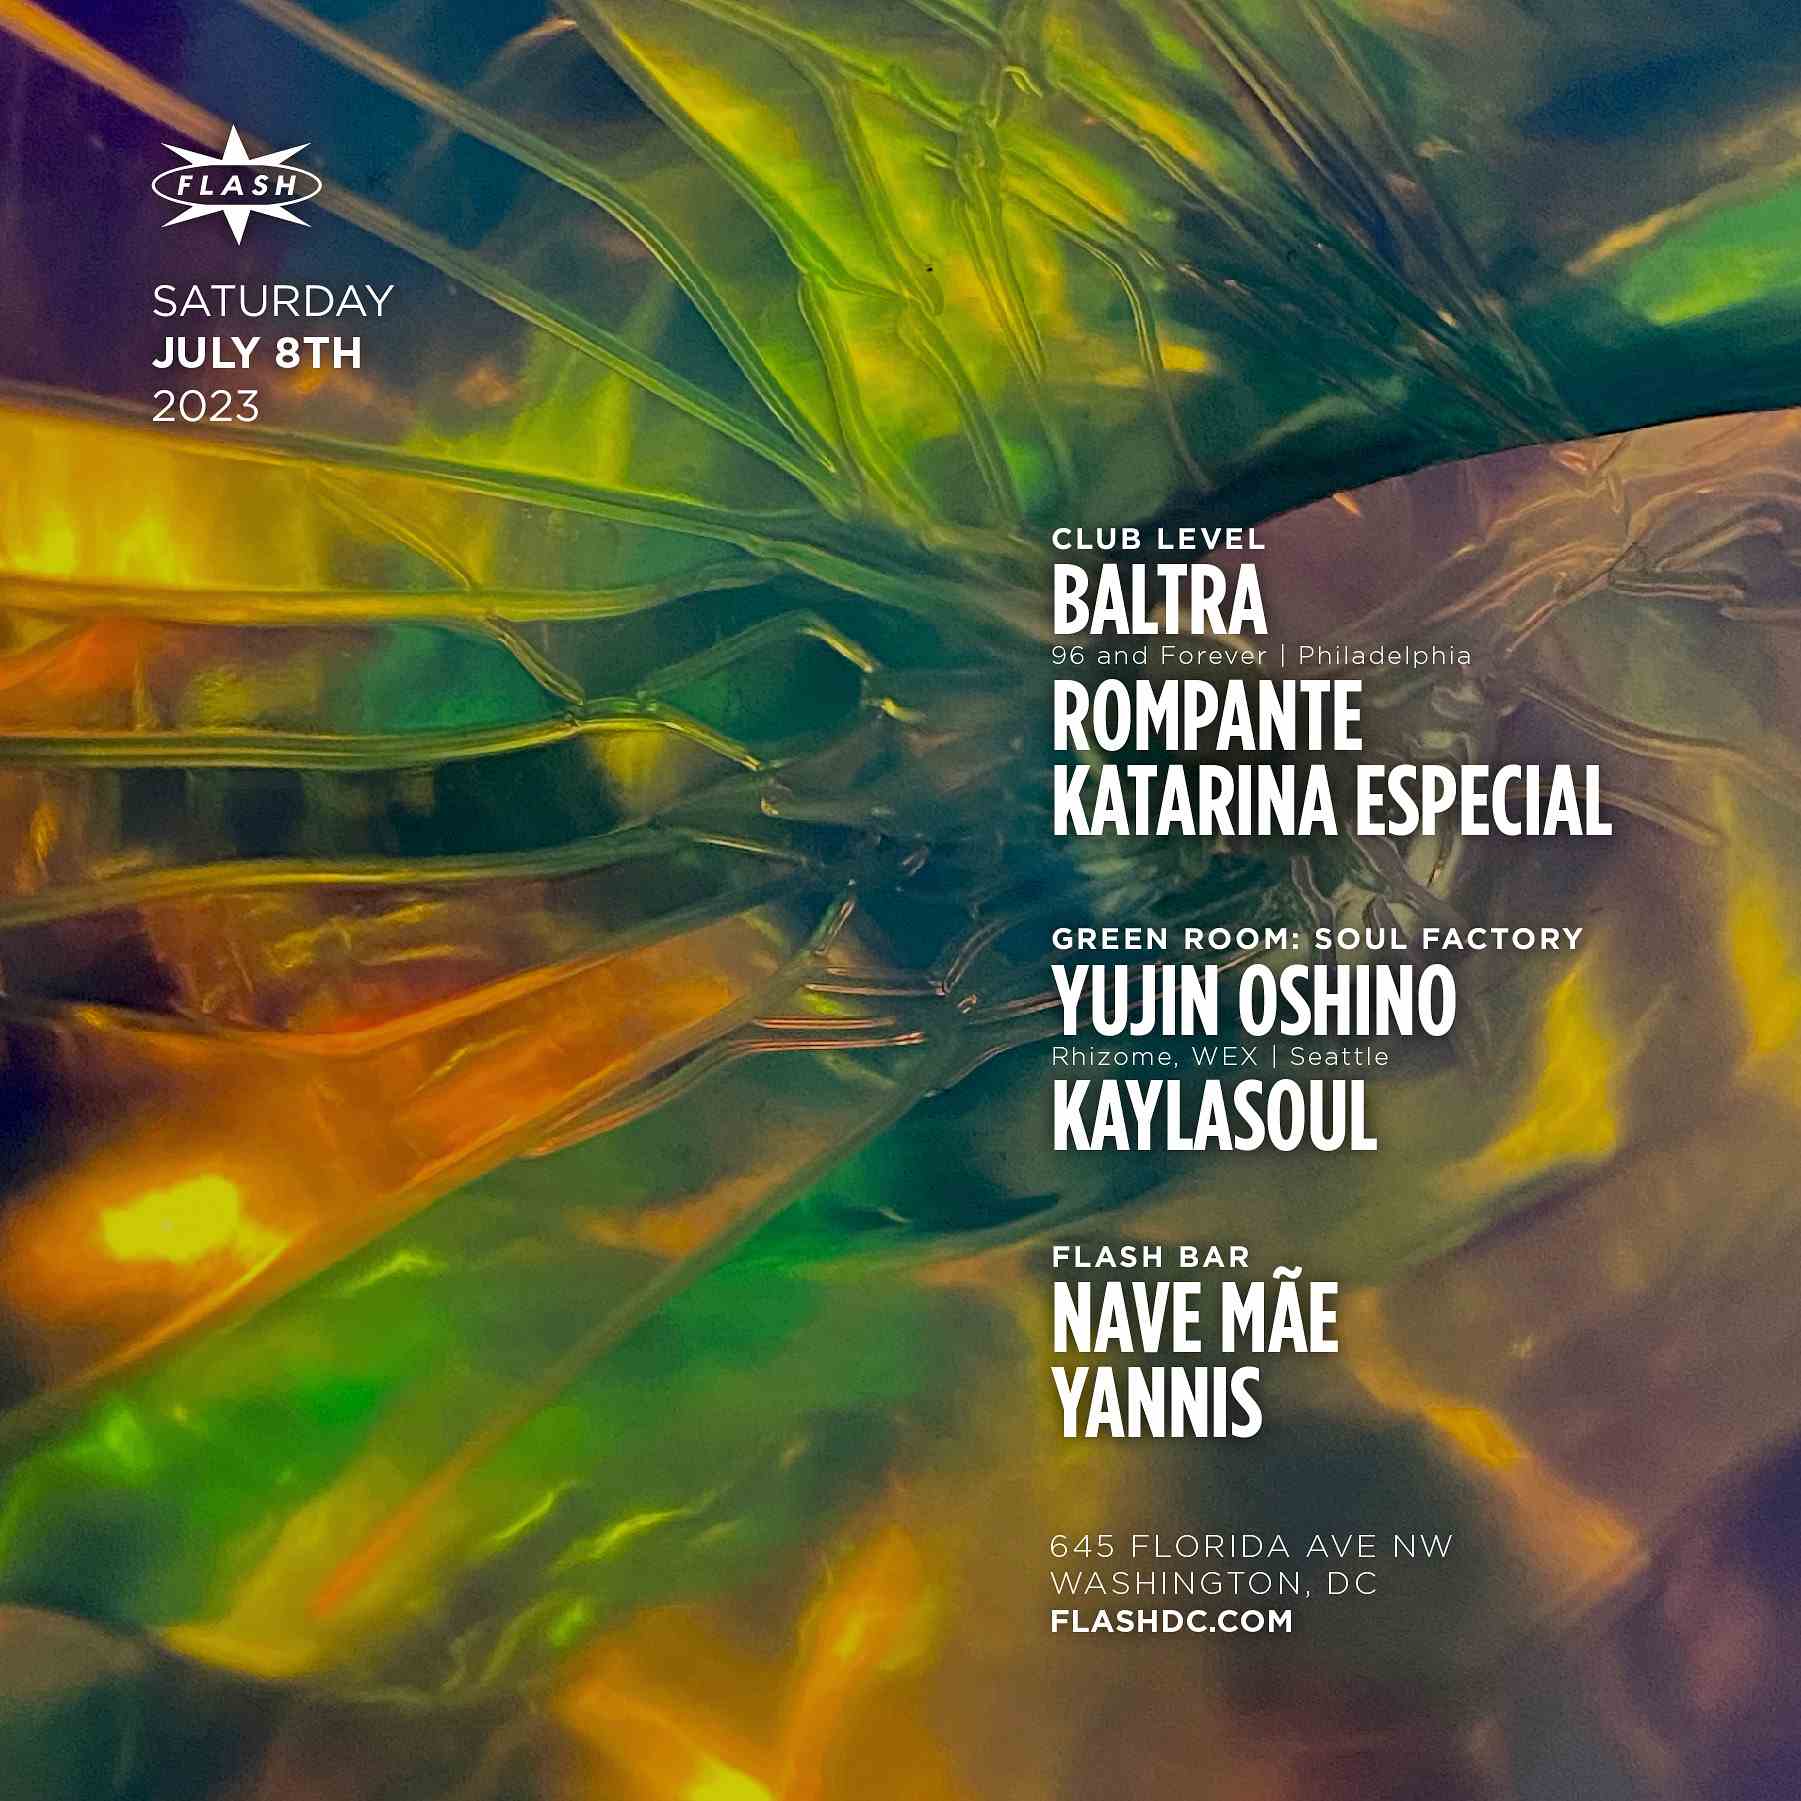 Event image for Baltra